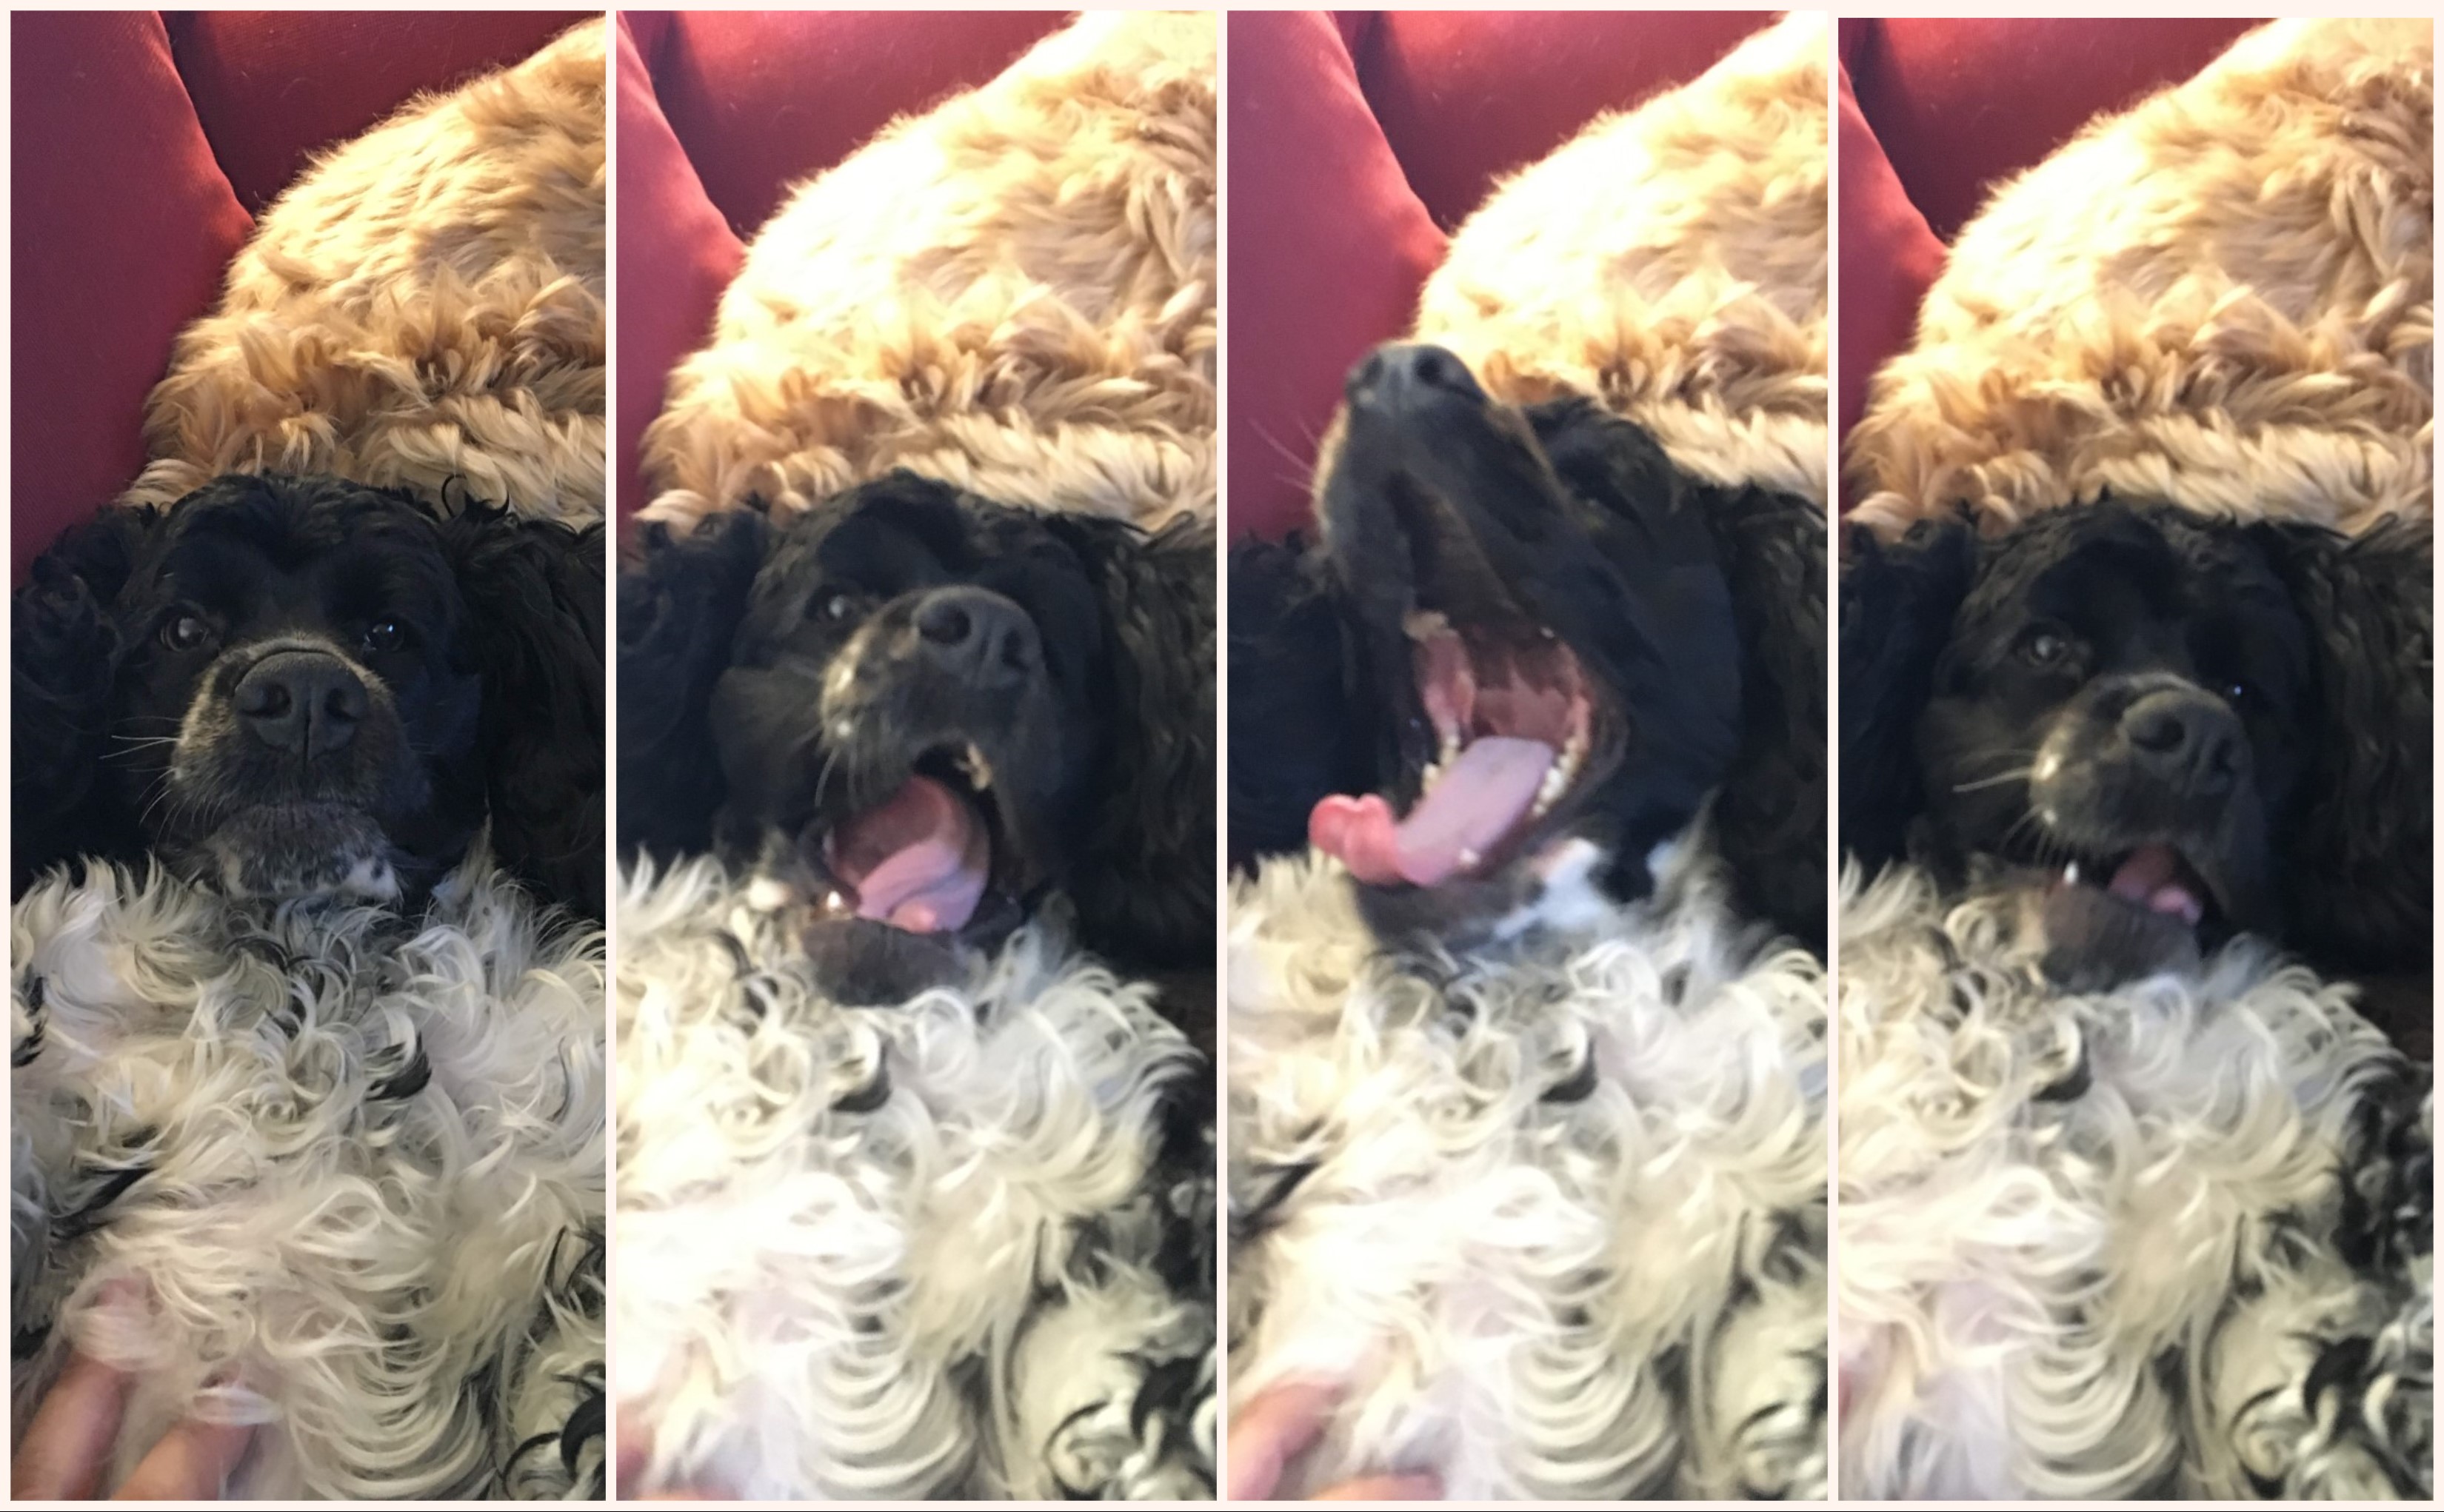 Murphy: A yawn in four stages